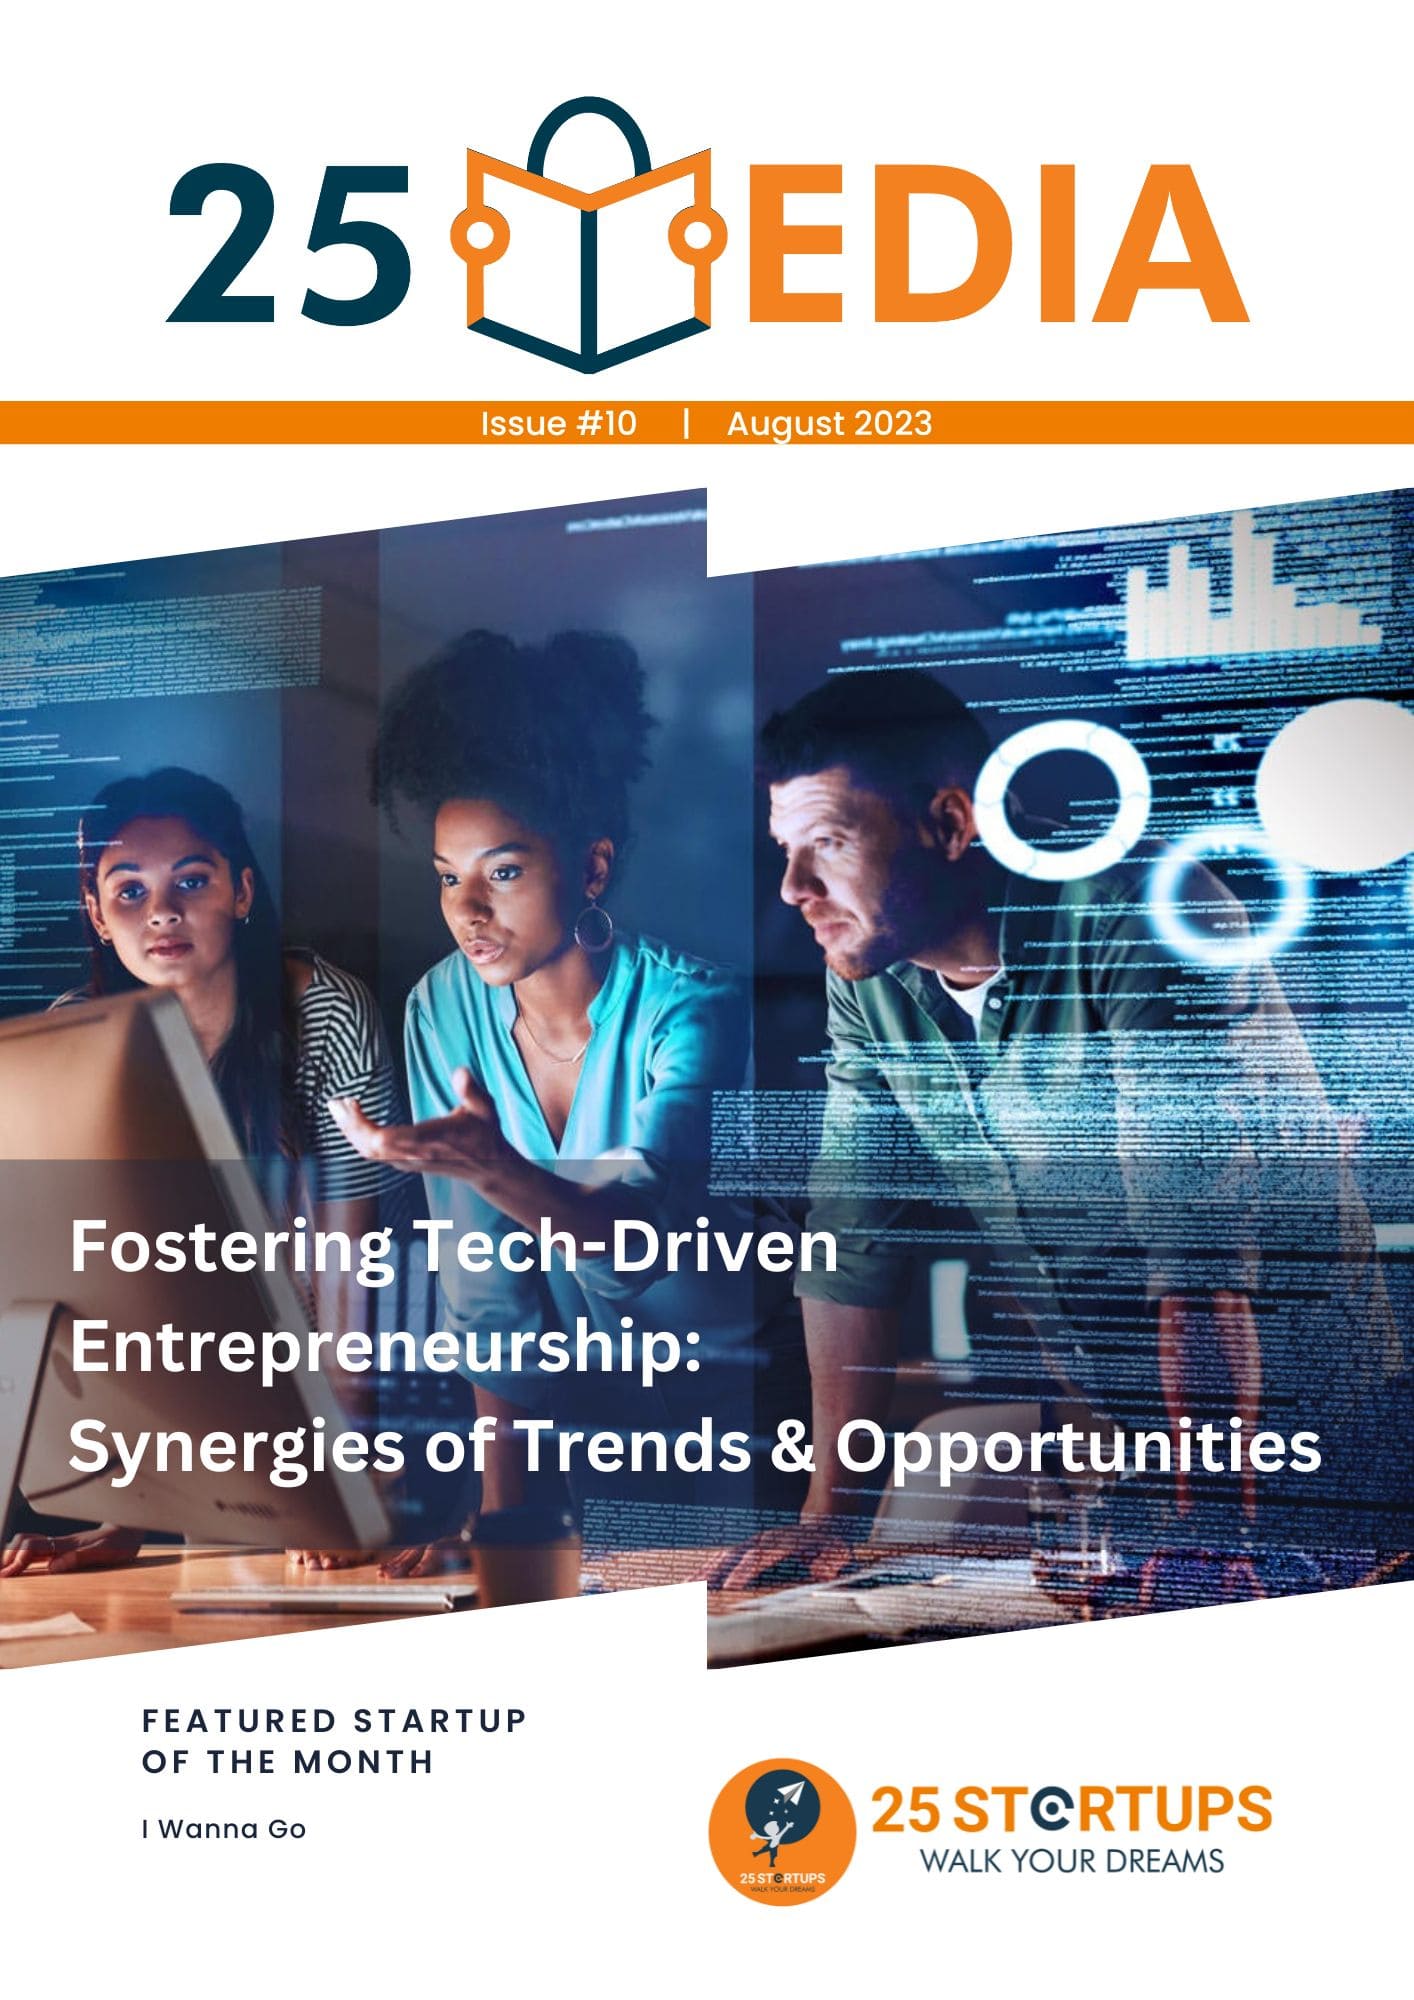 25 Media Issue #10: Fostering Tech-Driven Entrepreneurship: Synergies of Trends & Opportunities